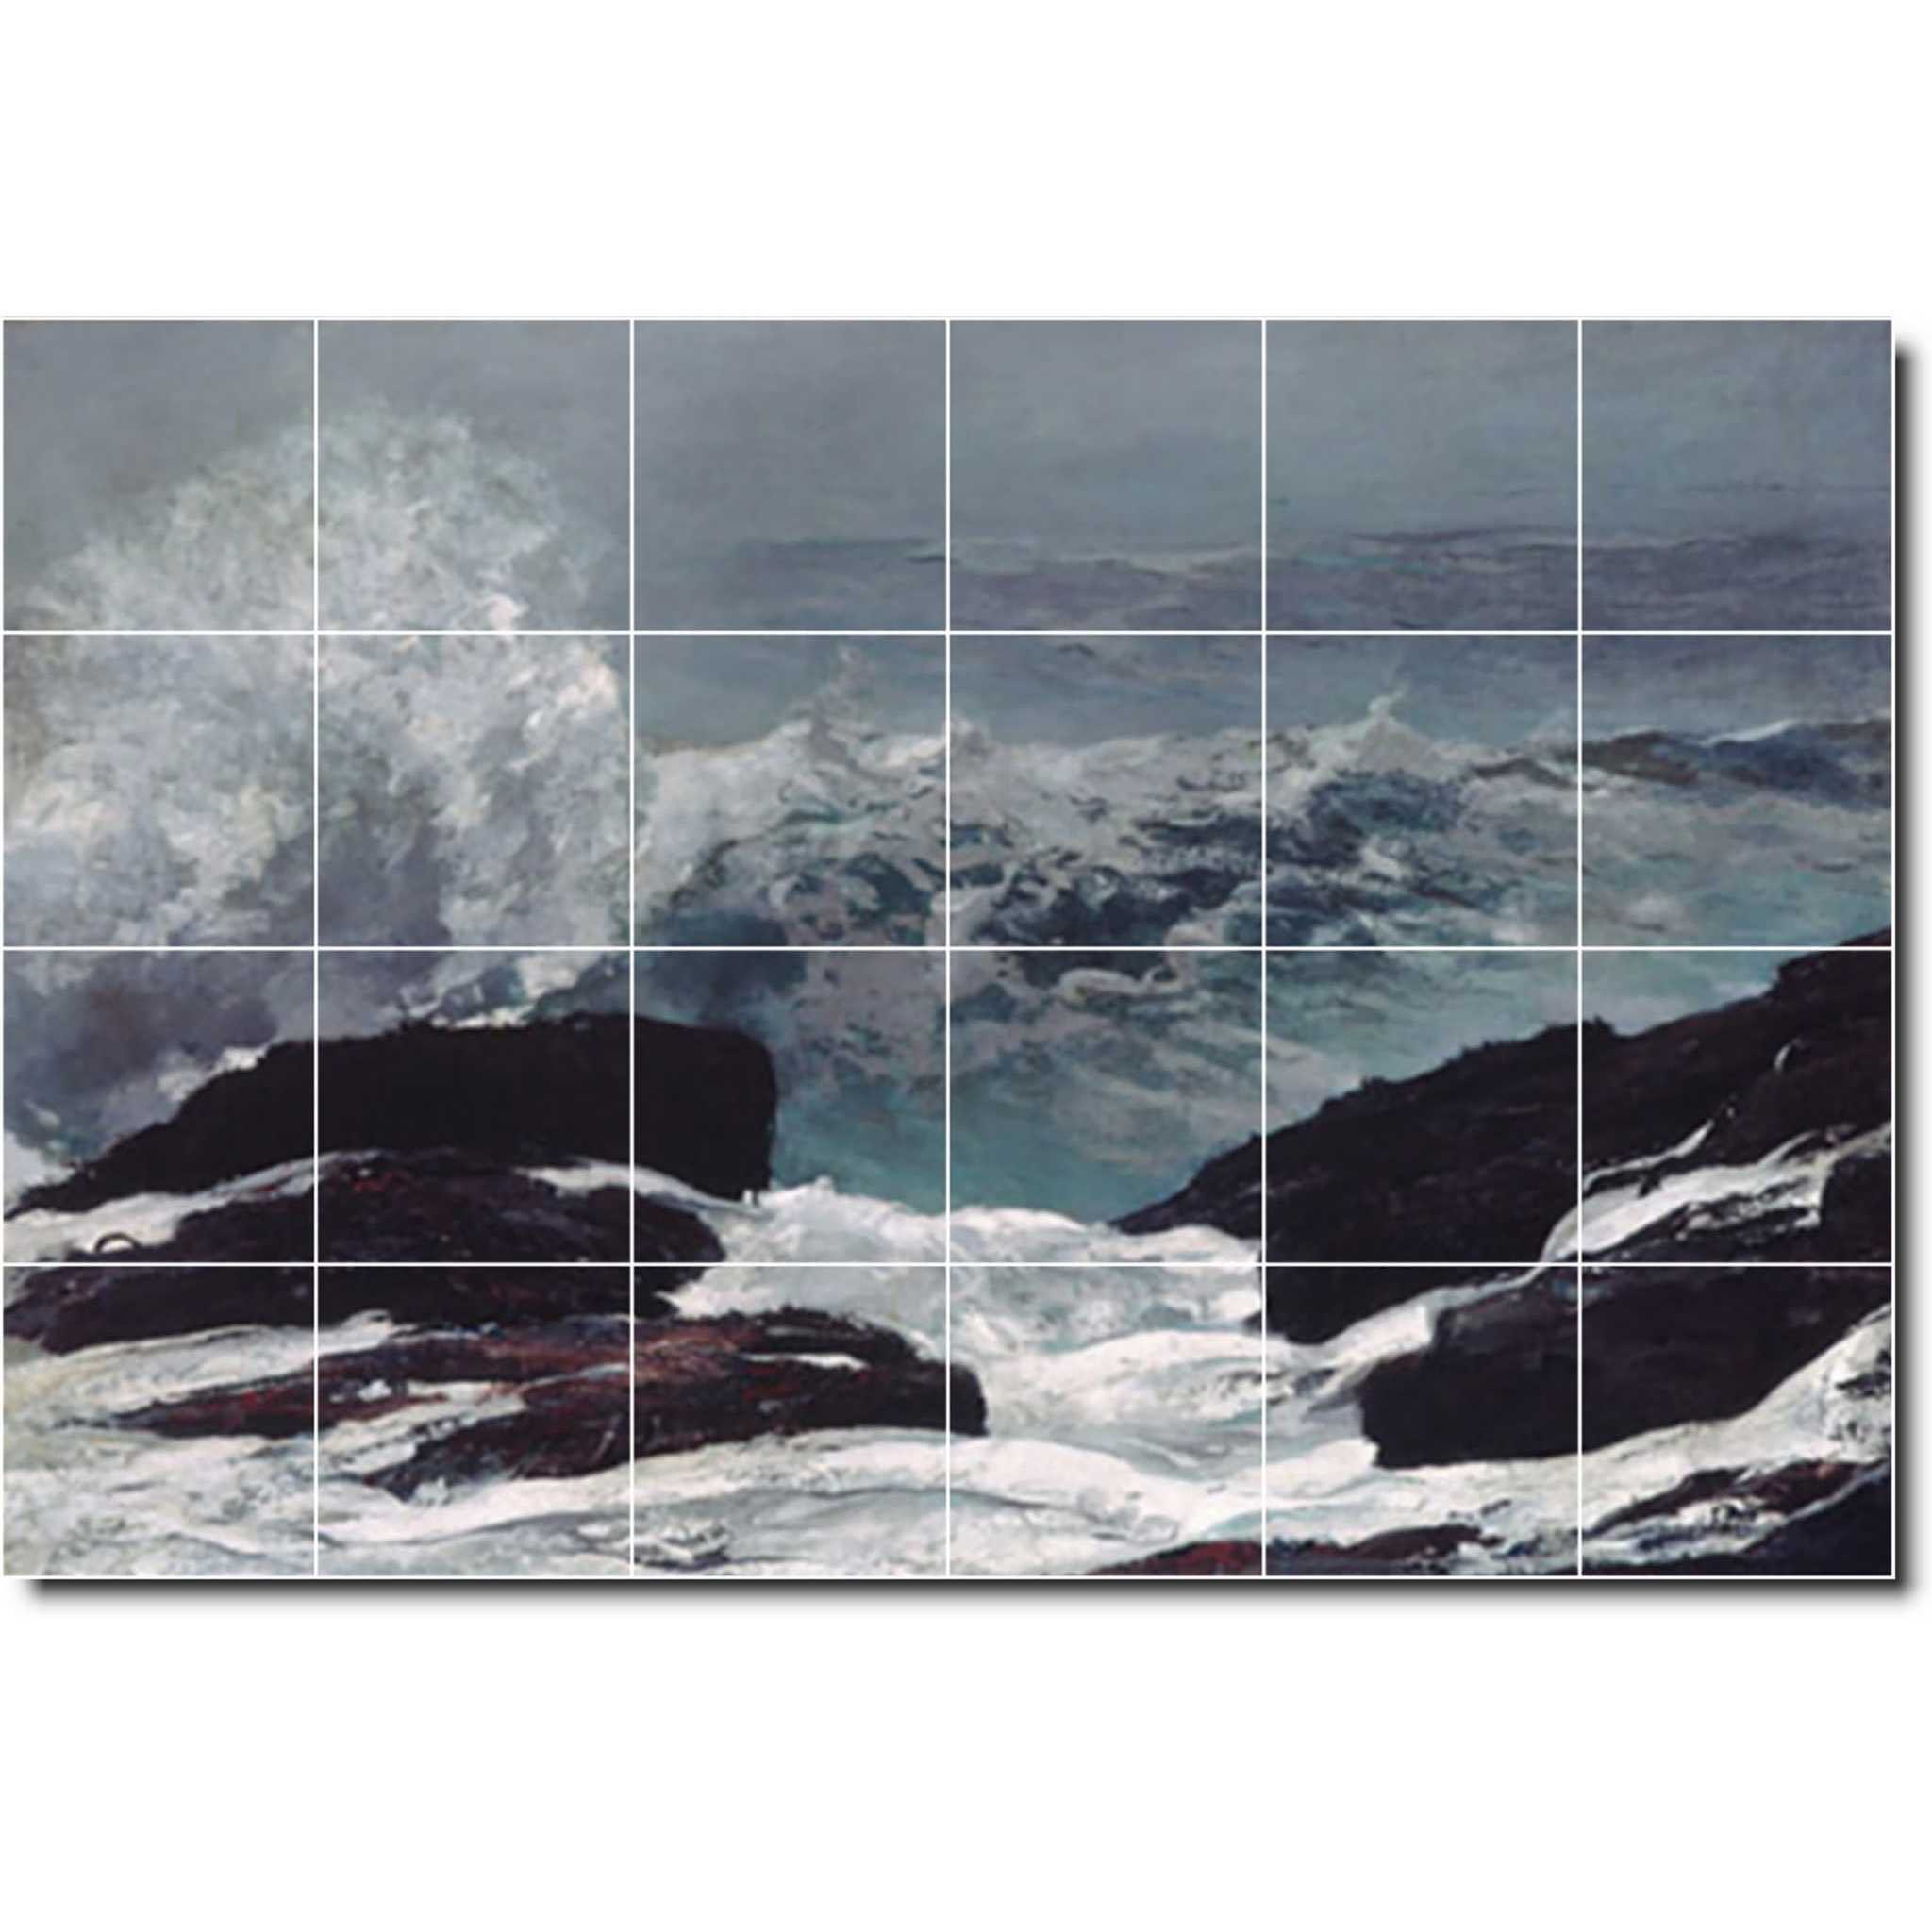 Winslow Homer Waterfront Painting Ceramic Tile Mural P04424-XL. 72"W x 48"H (24) 12x12 tiles